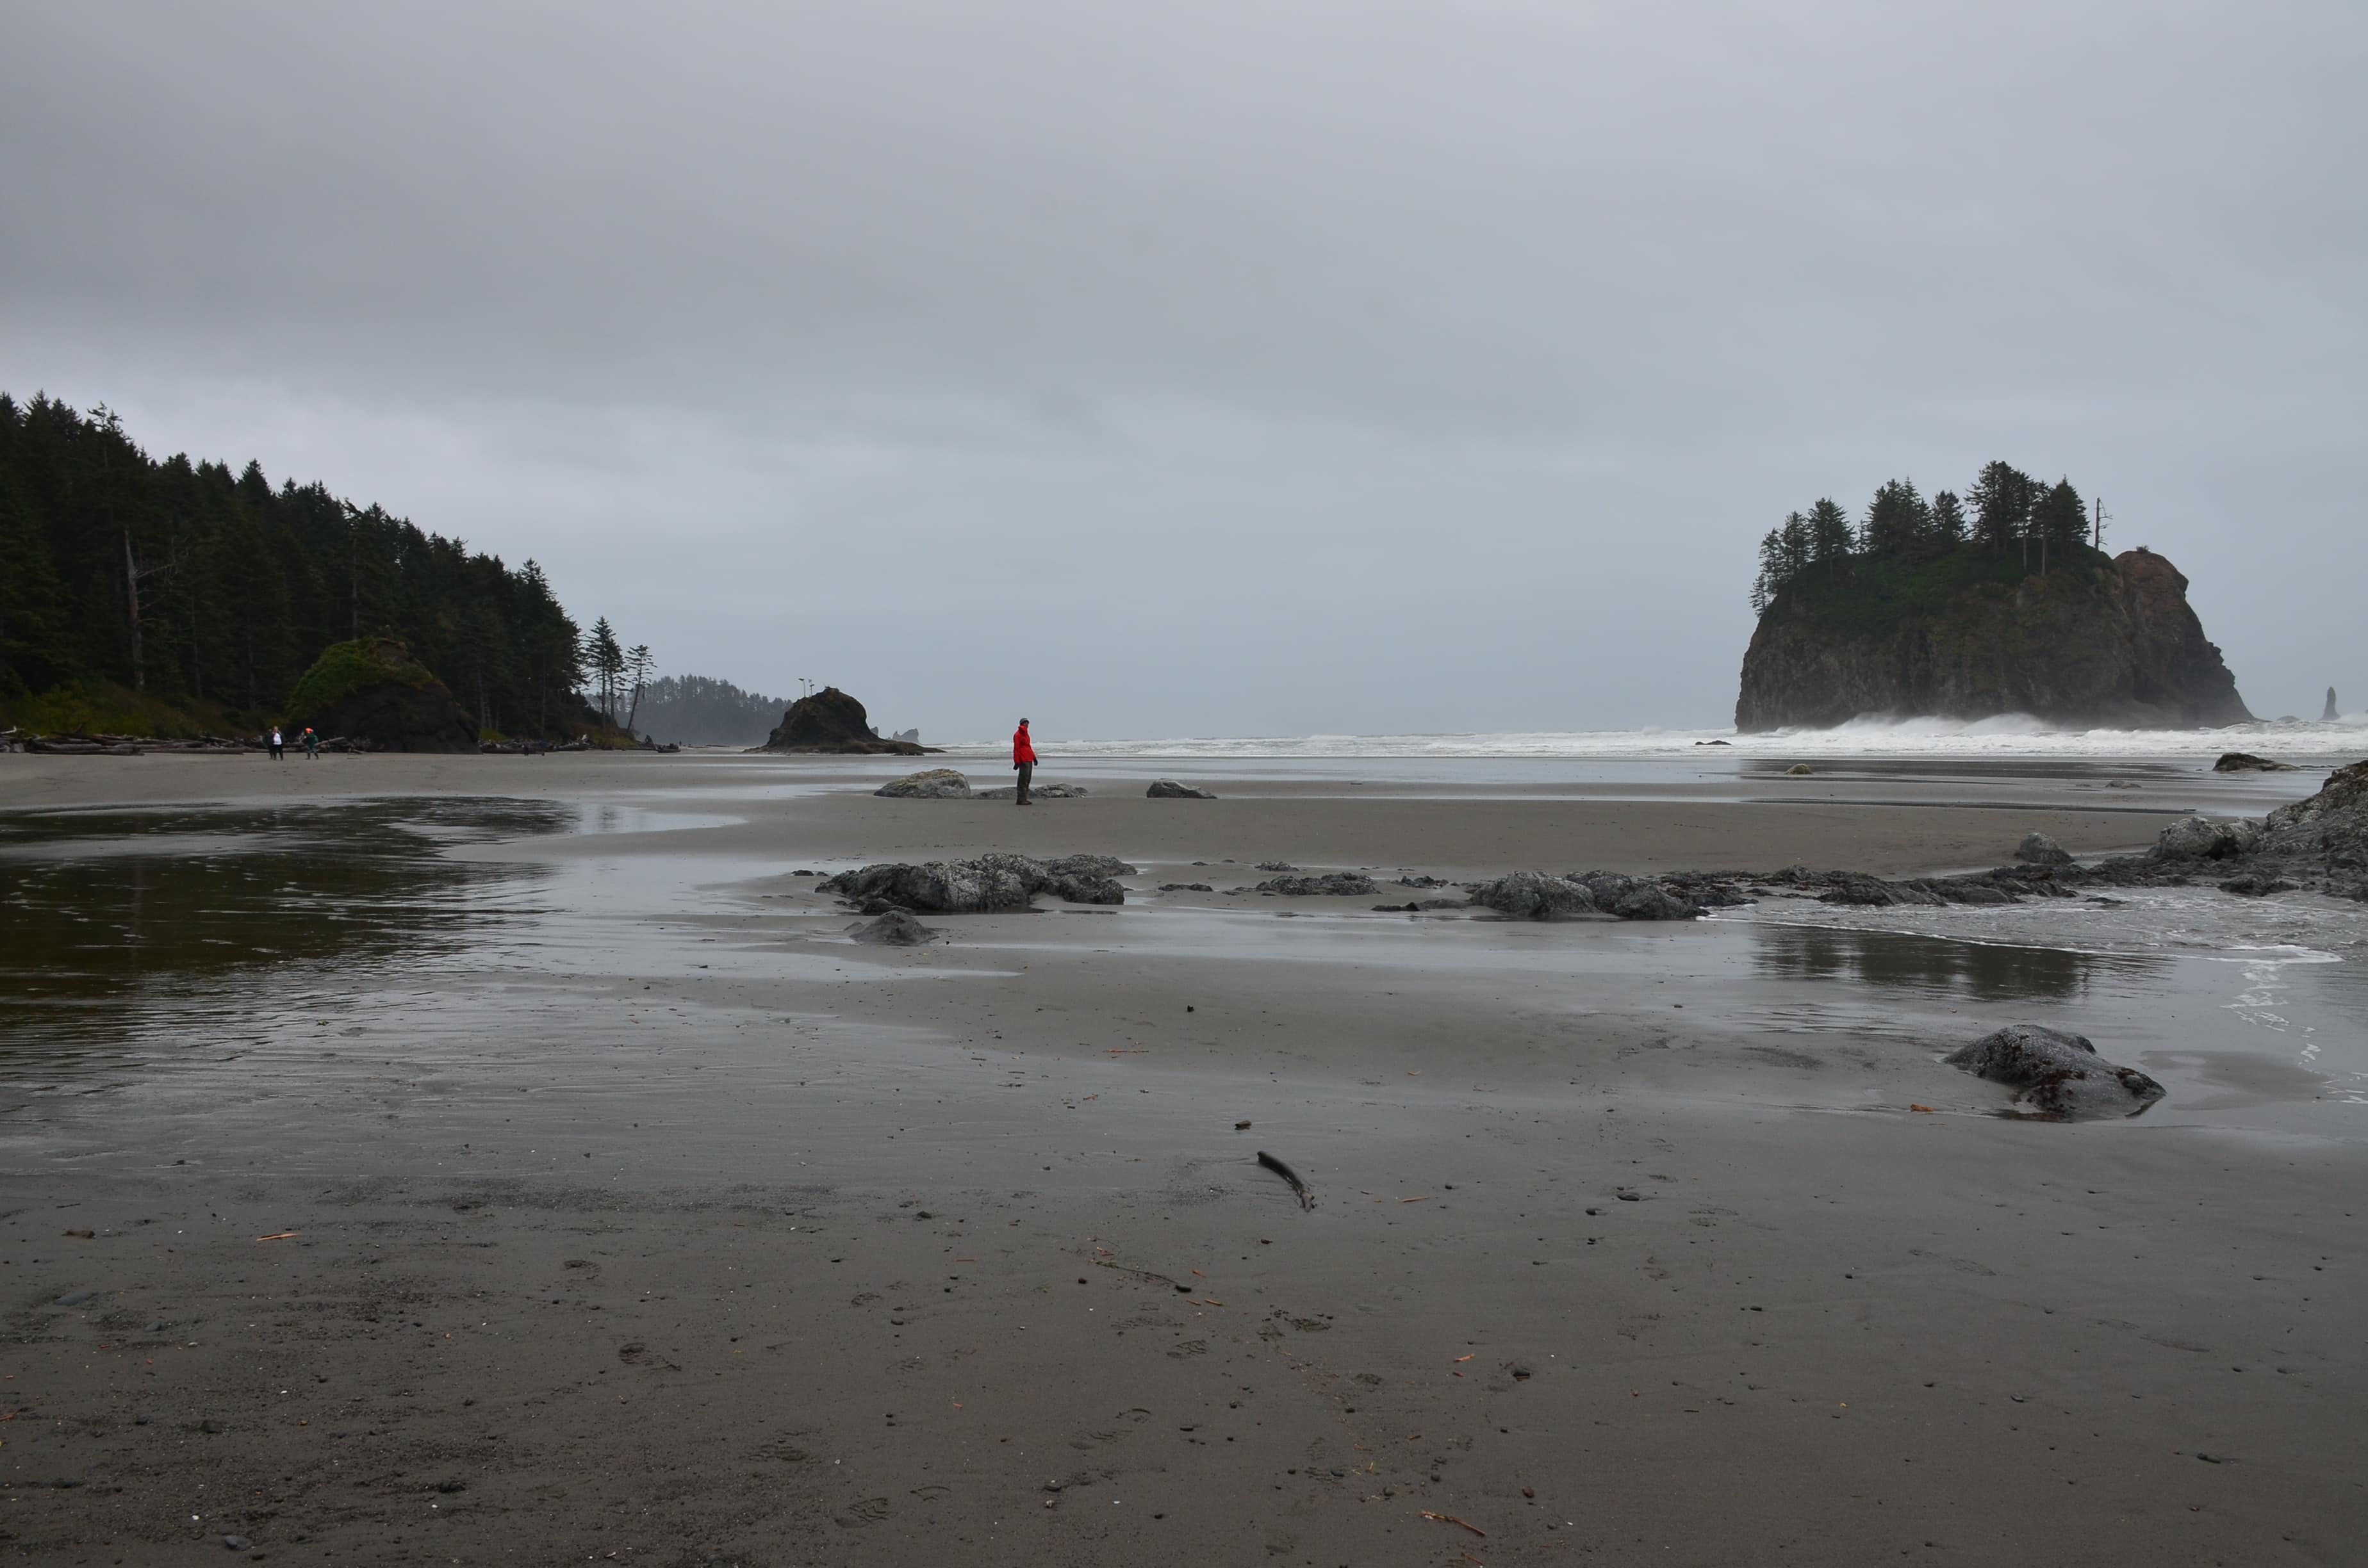 Second Beach at Olympic National Park in Washington